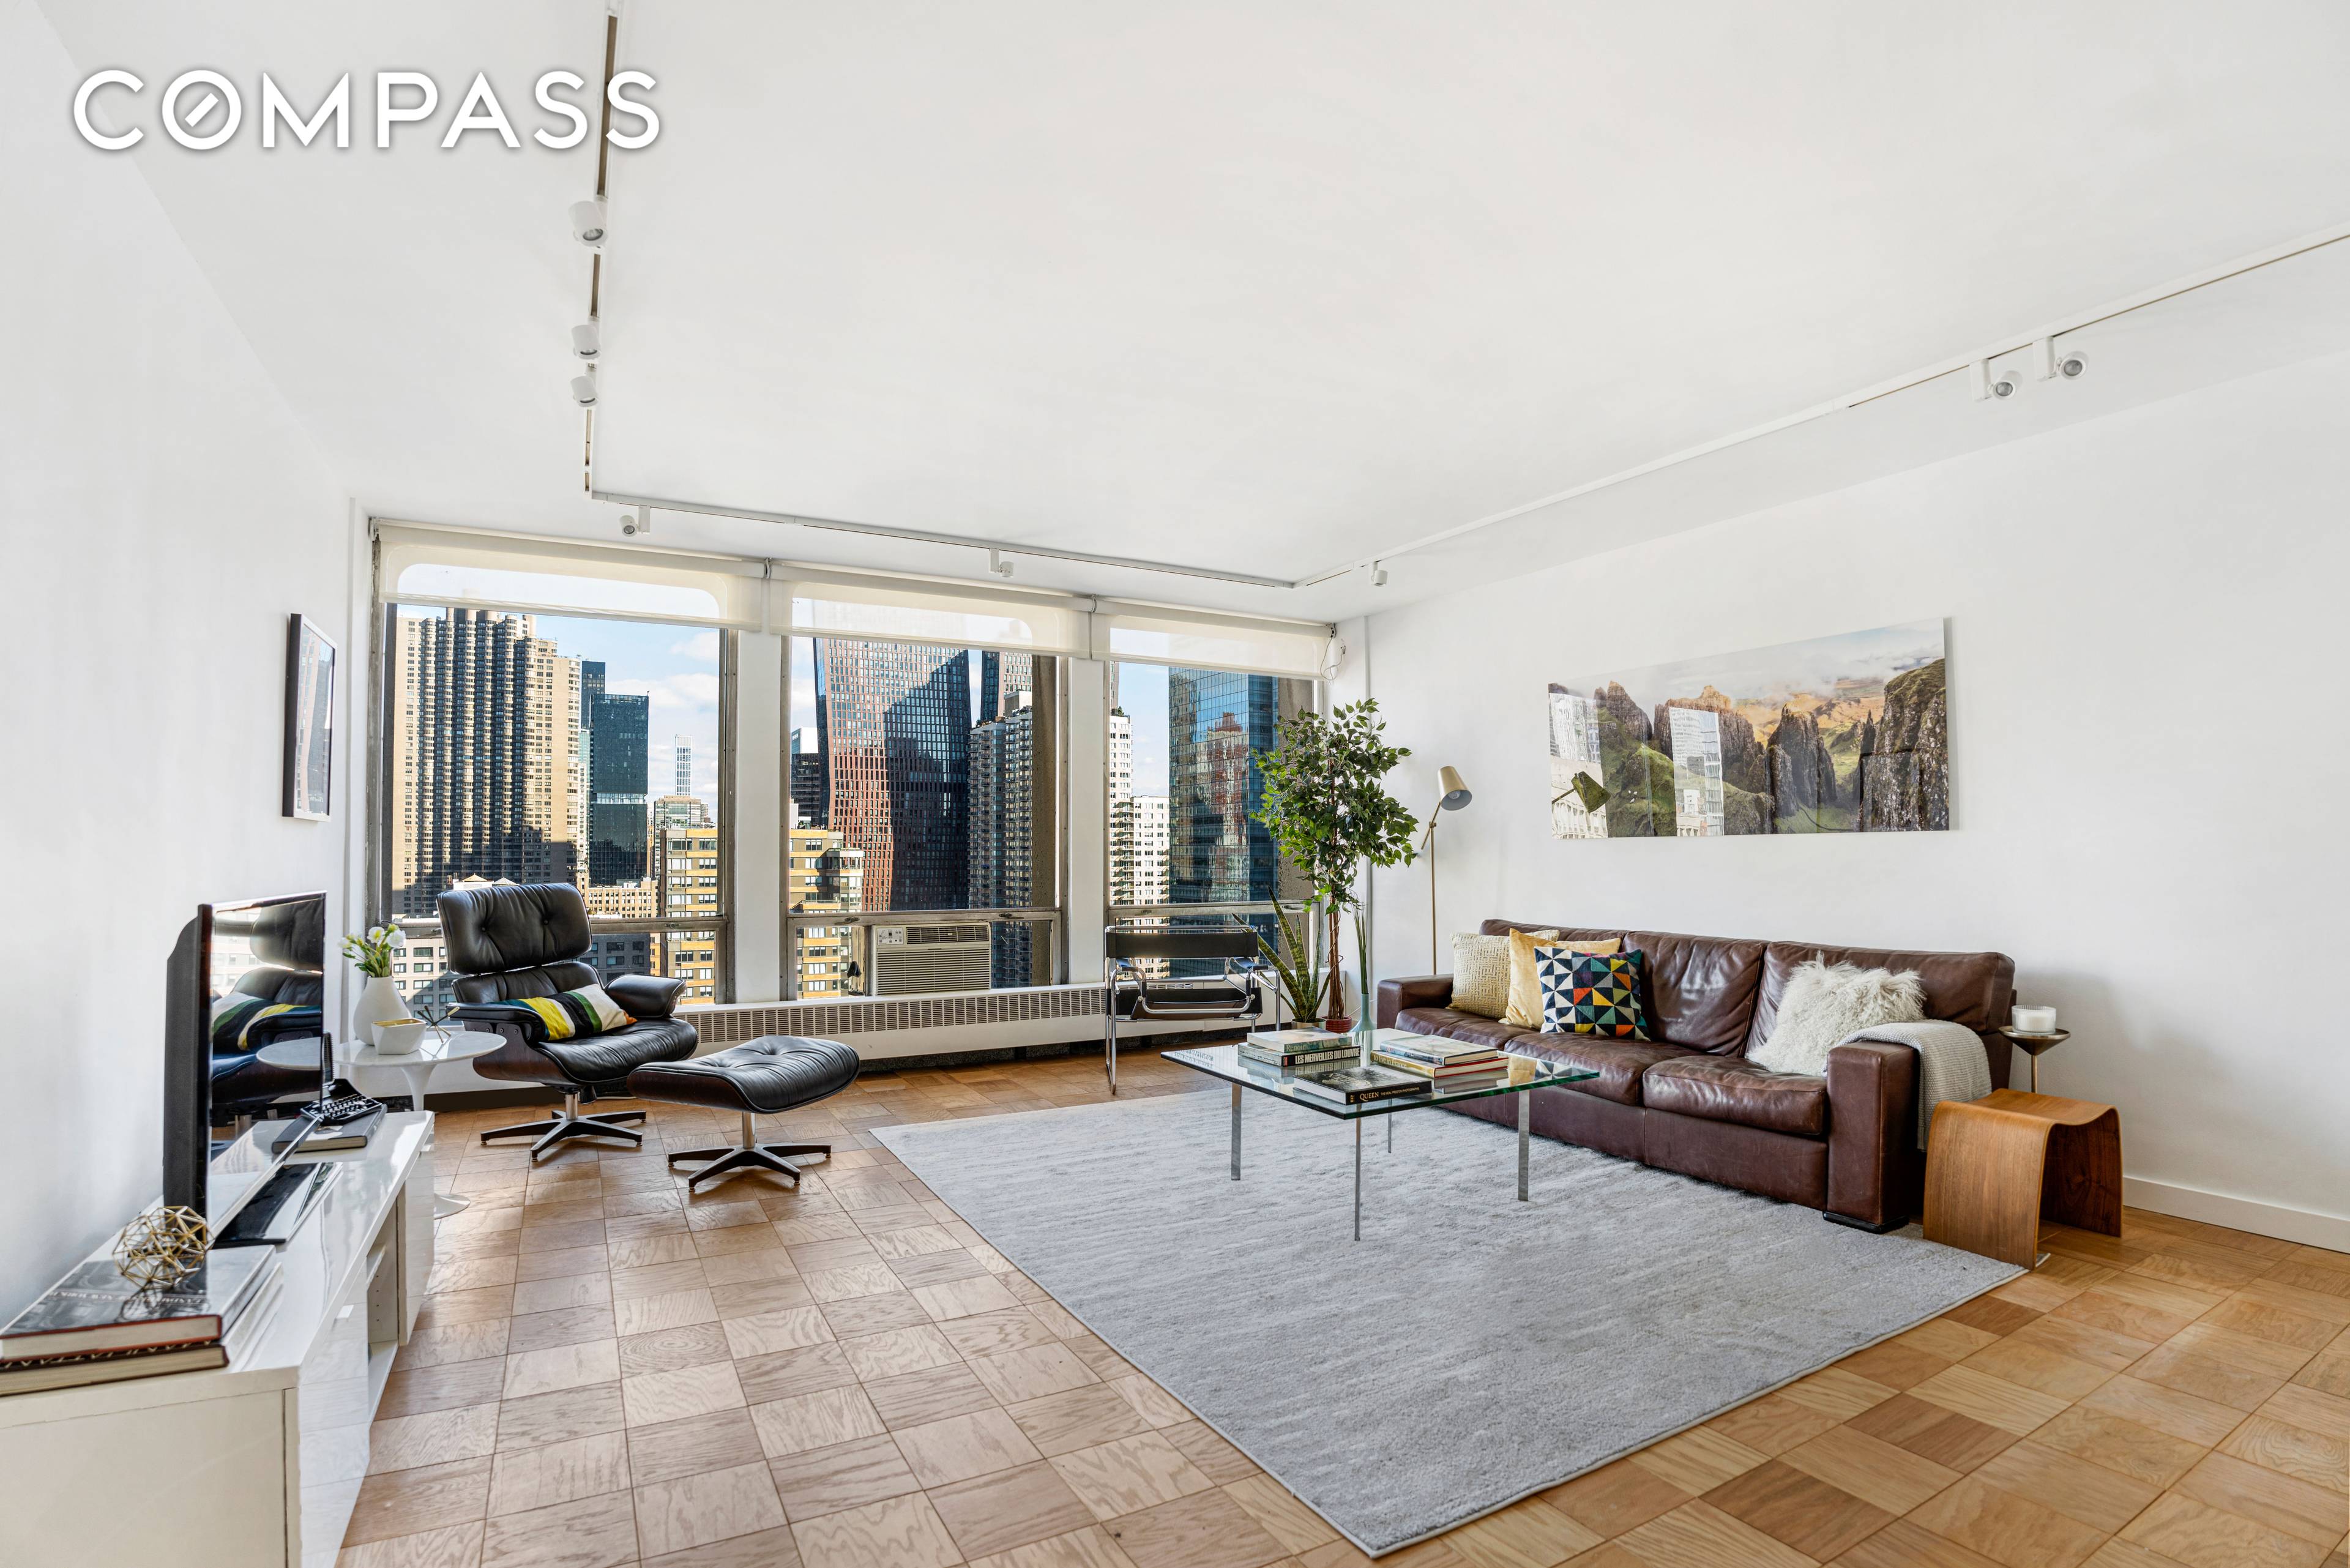 Perched on the 20th of 21 floors, this bright and spacious one bedroom apartment features over 27 feet of floor to ceiling windows.